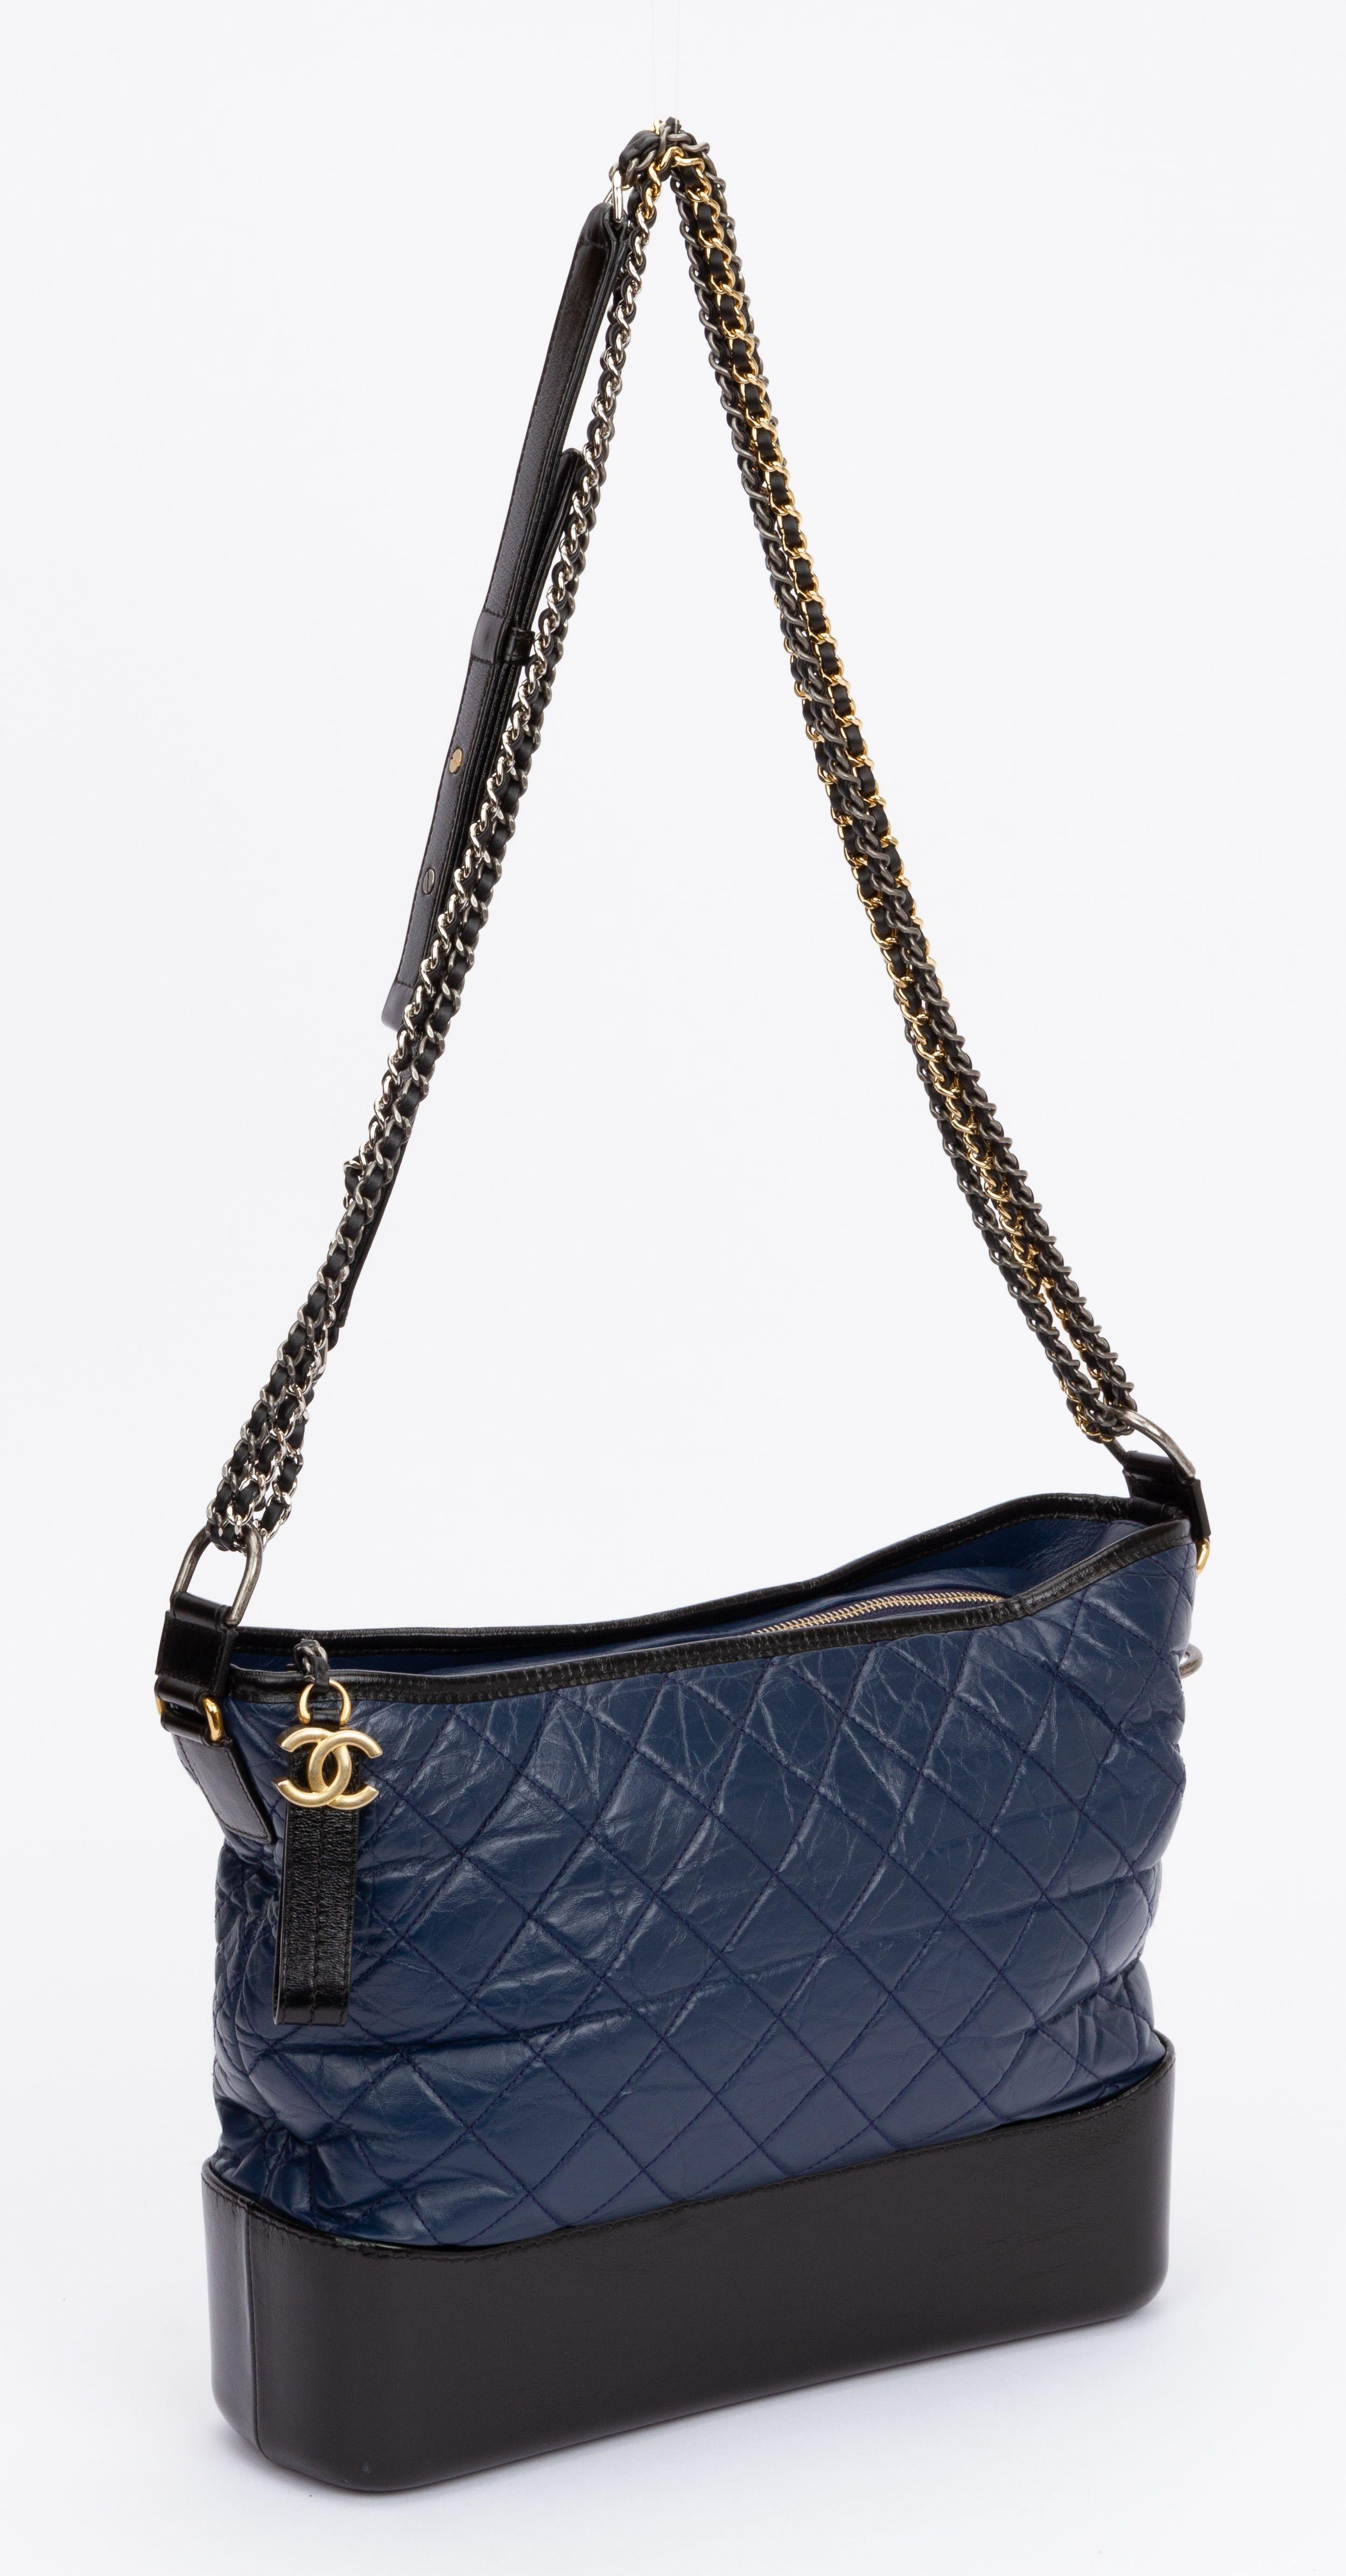 Chanel large Gabrielle bag in black and blu leather combination. Gold and ruthenium hardware. Shoulder strap drop 18.5